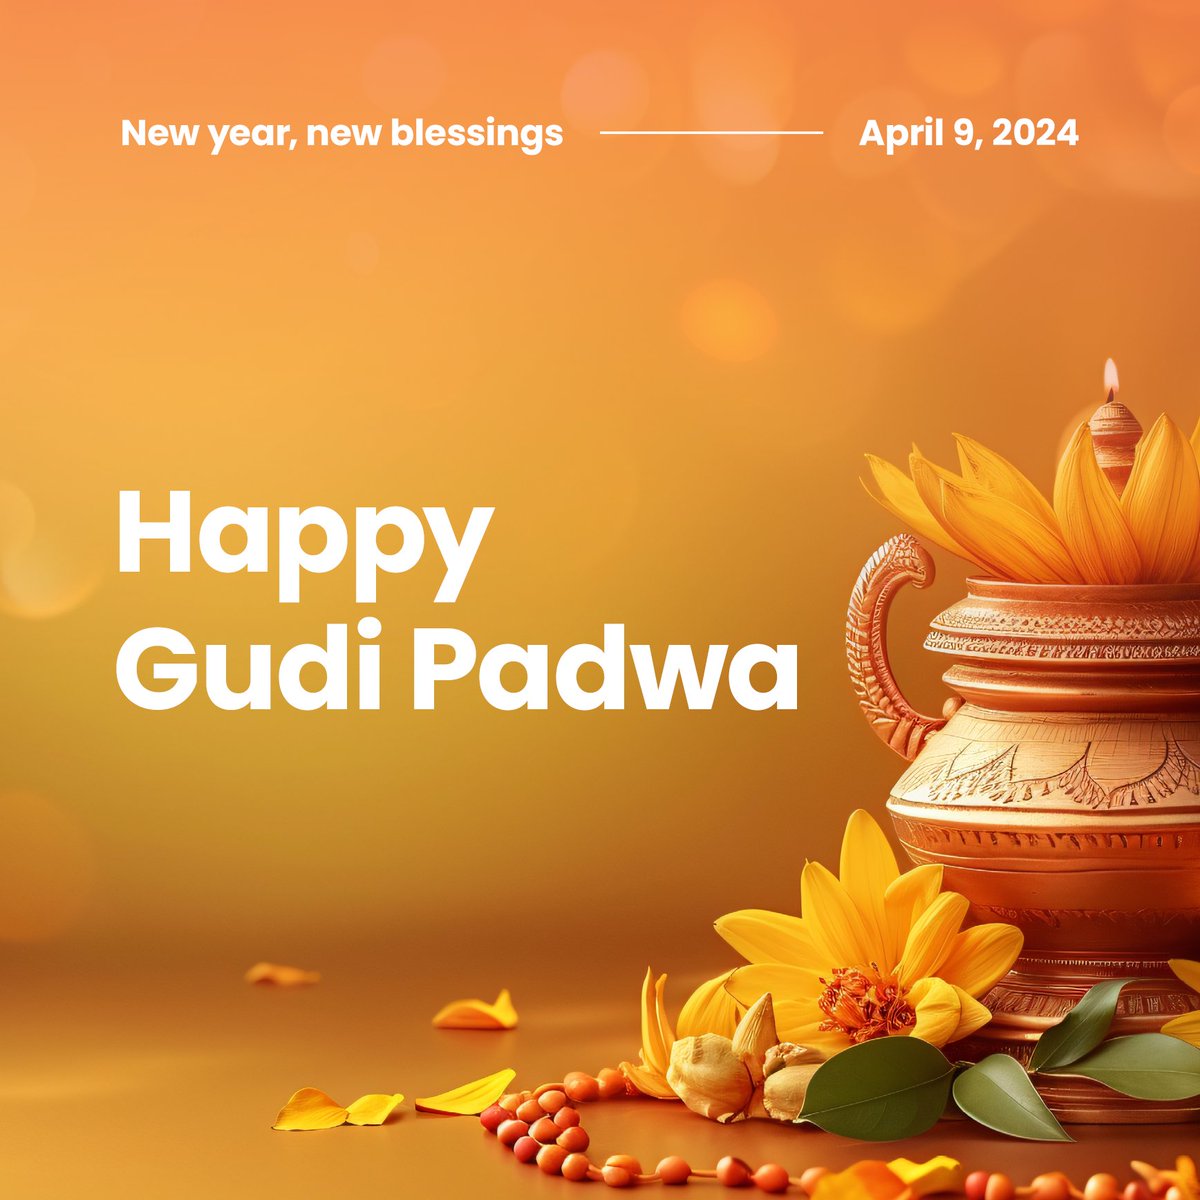 Happy Gudi Padwa! Wishing everyone a prosperous new year filled with joy, peace, and endless blessings. 🎉🪔